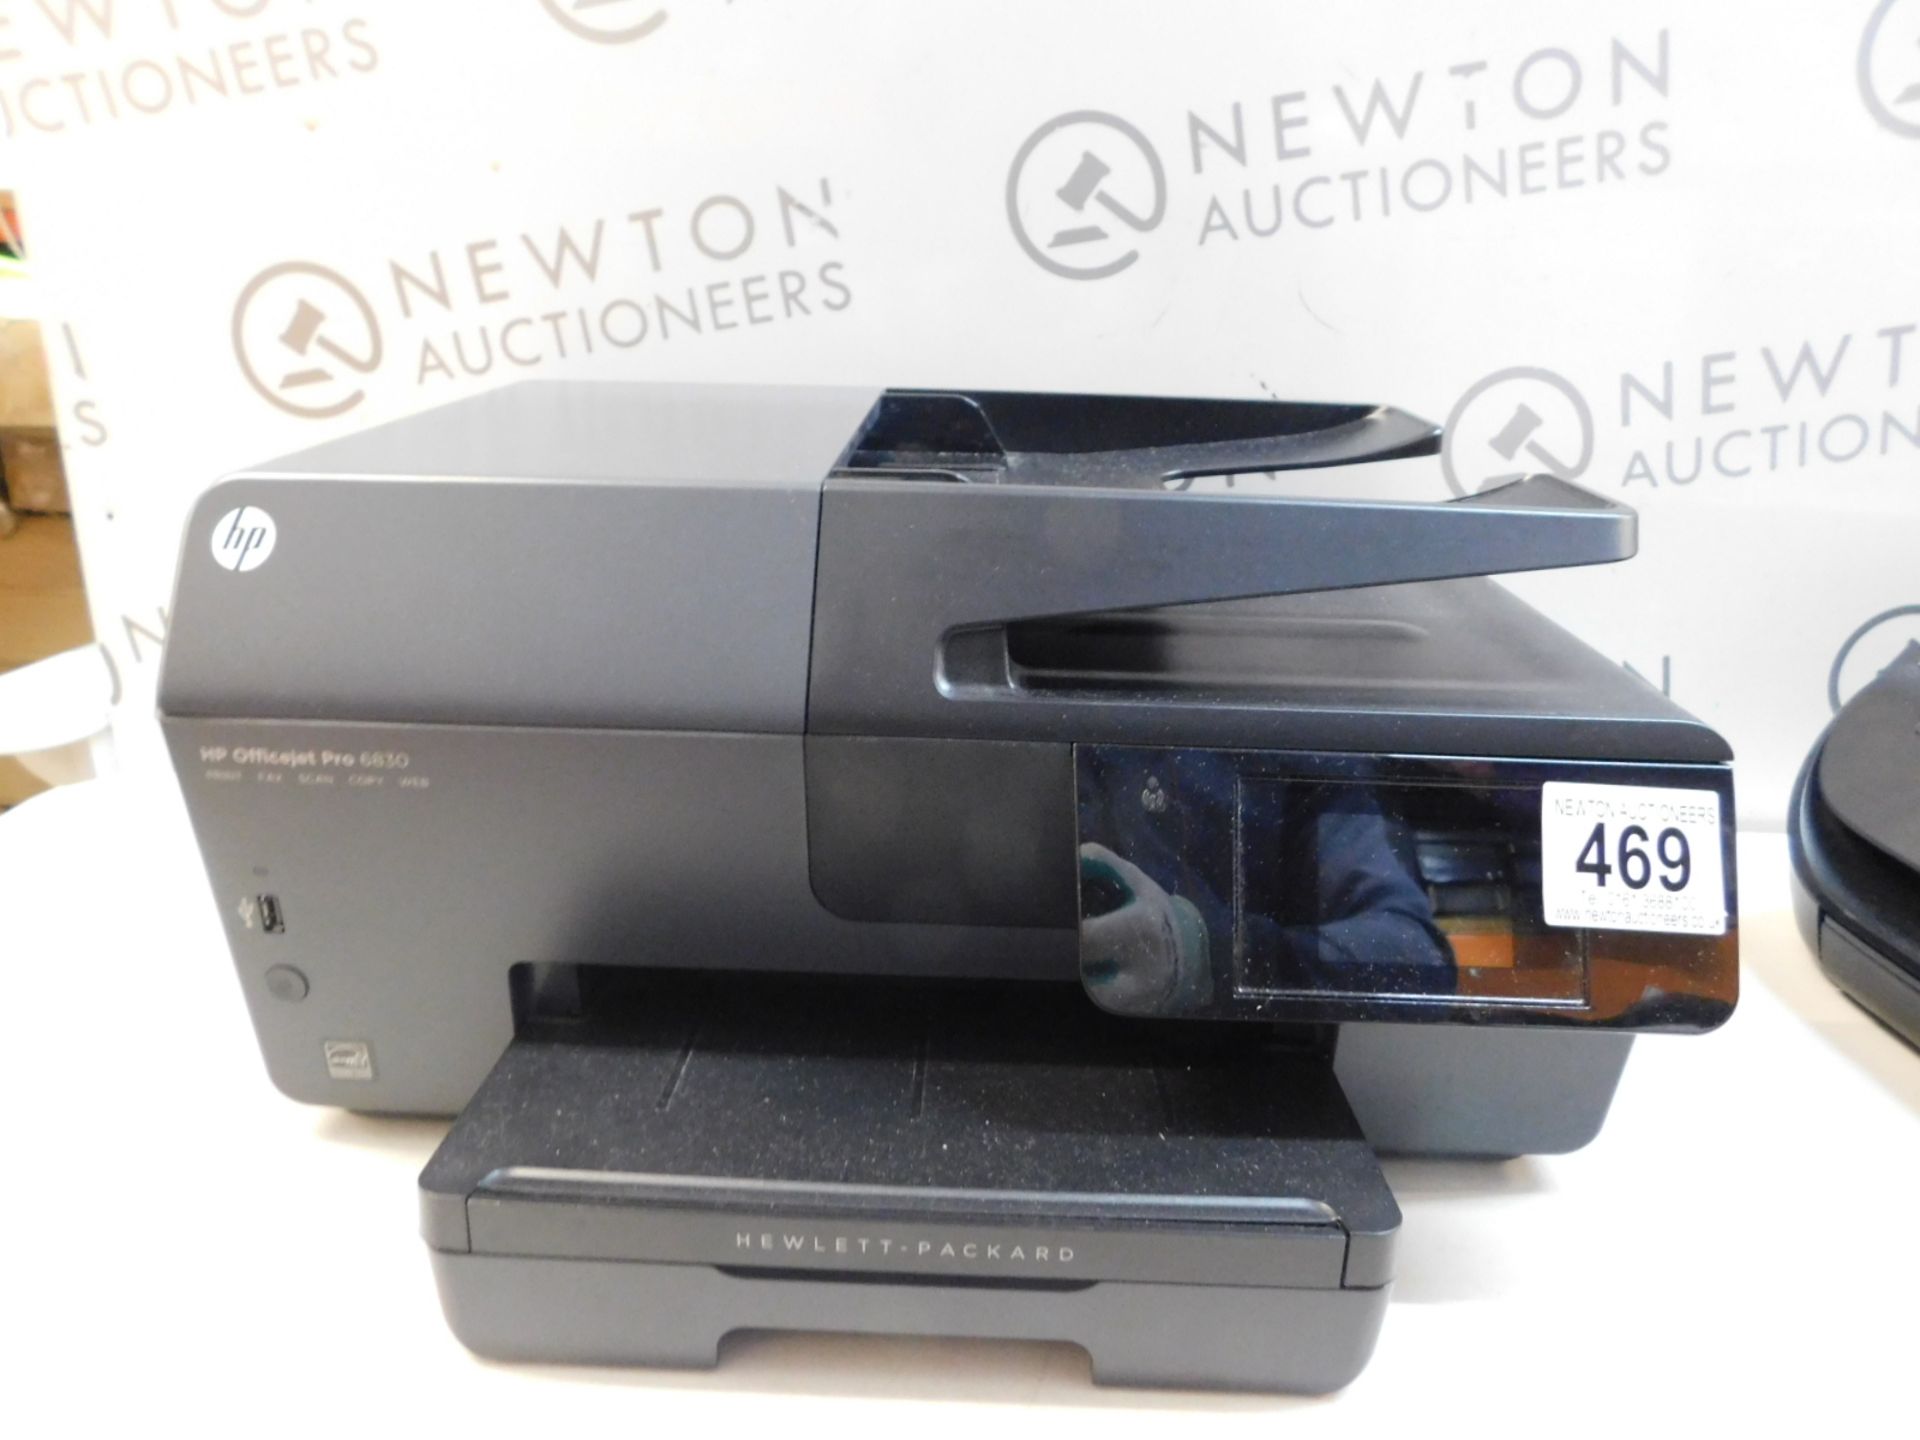 1 HP OFFICEJET PRO 6830 ALL IN ONE PRINTER RRP £249